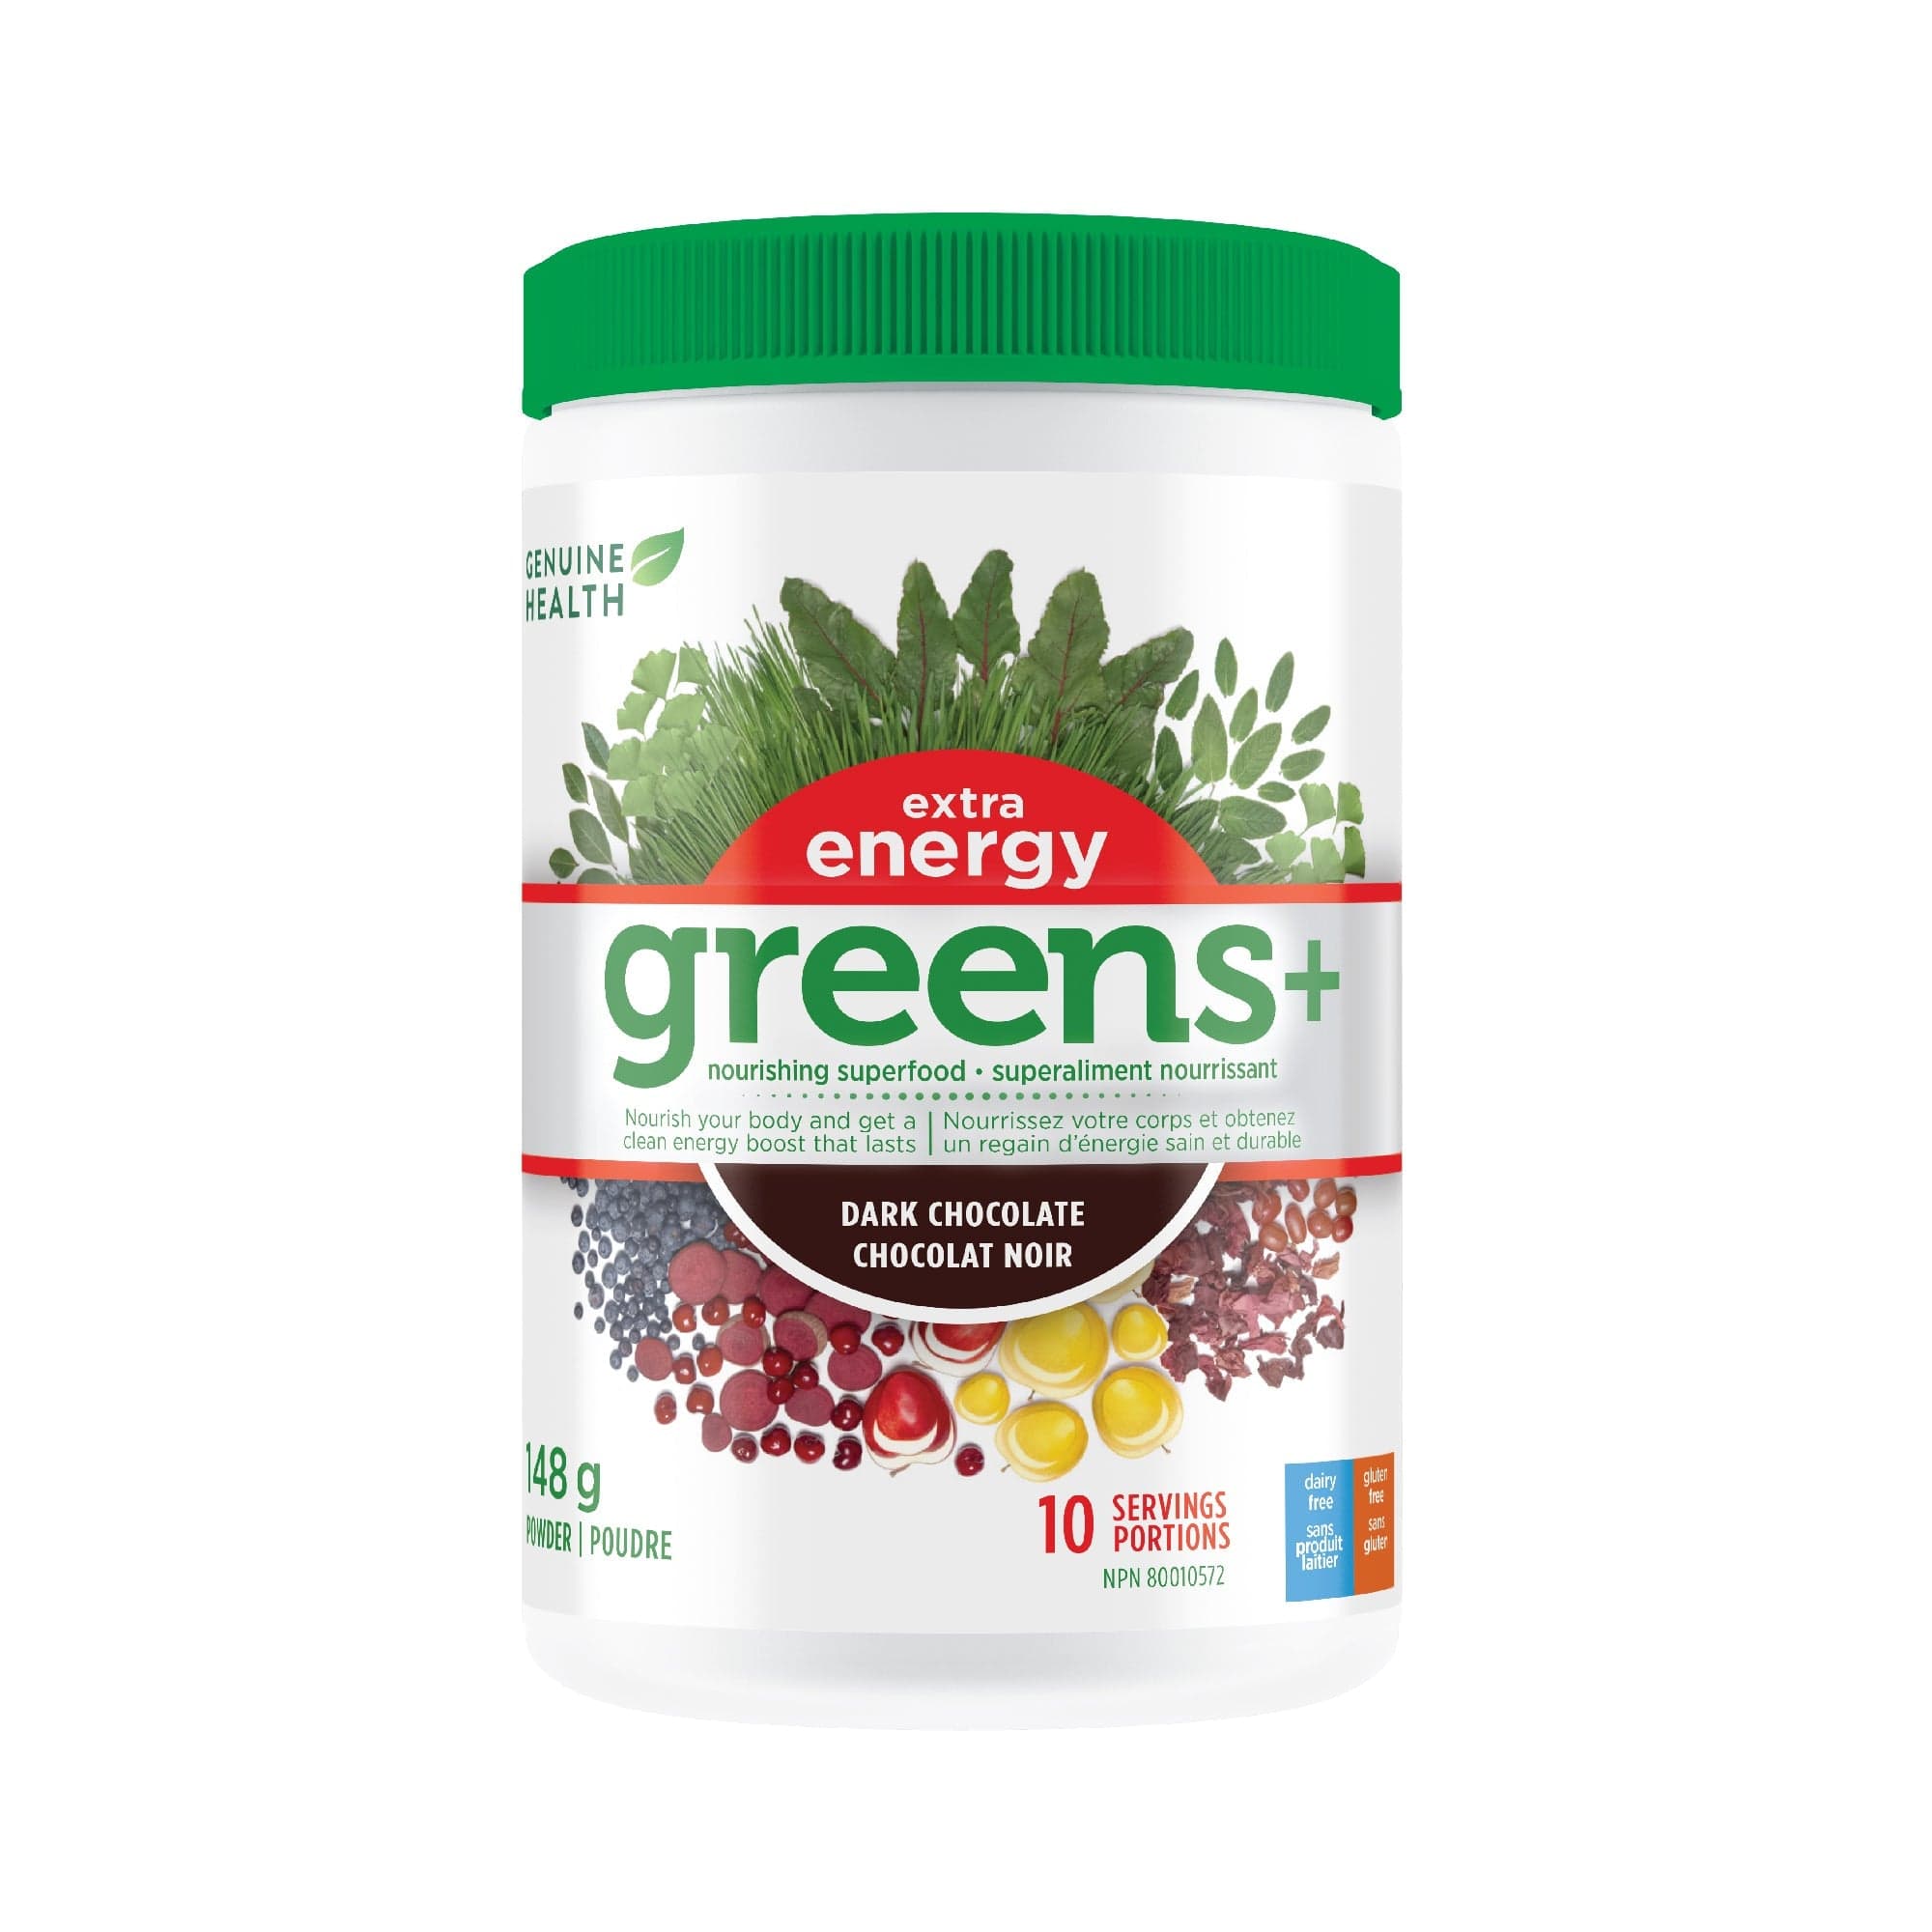 GENUINE HEALTH Suppléments Green + extra energy (vanille) 444g